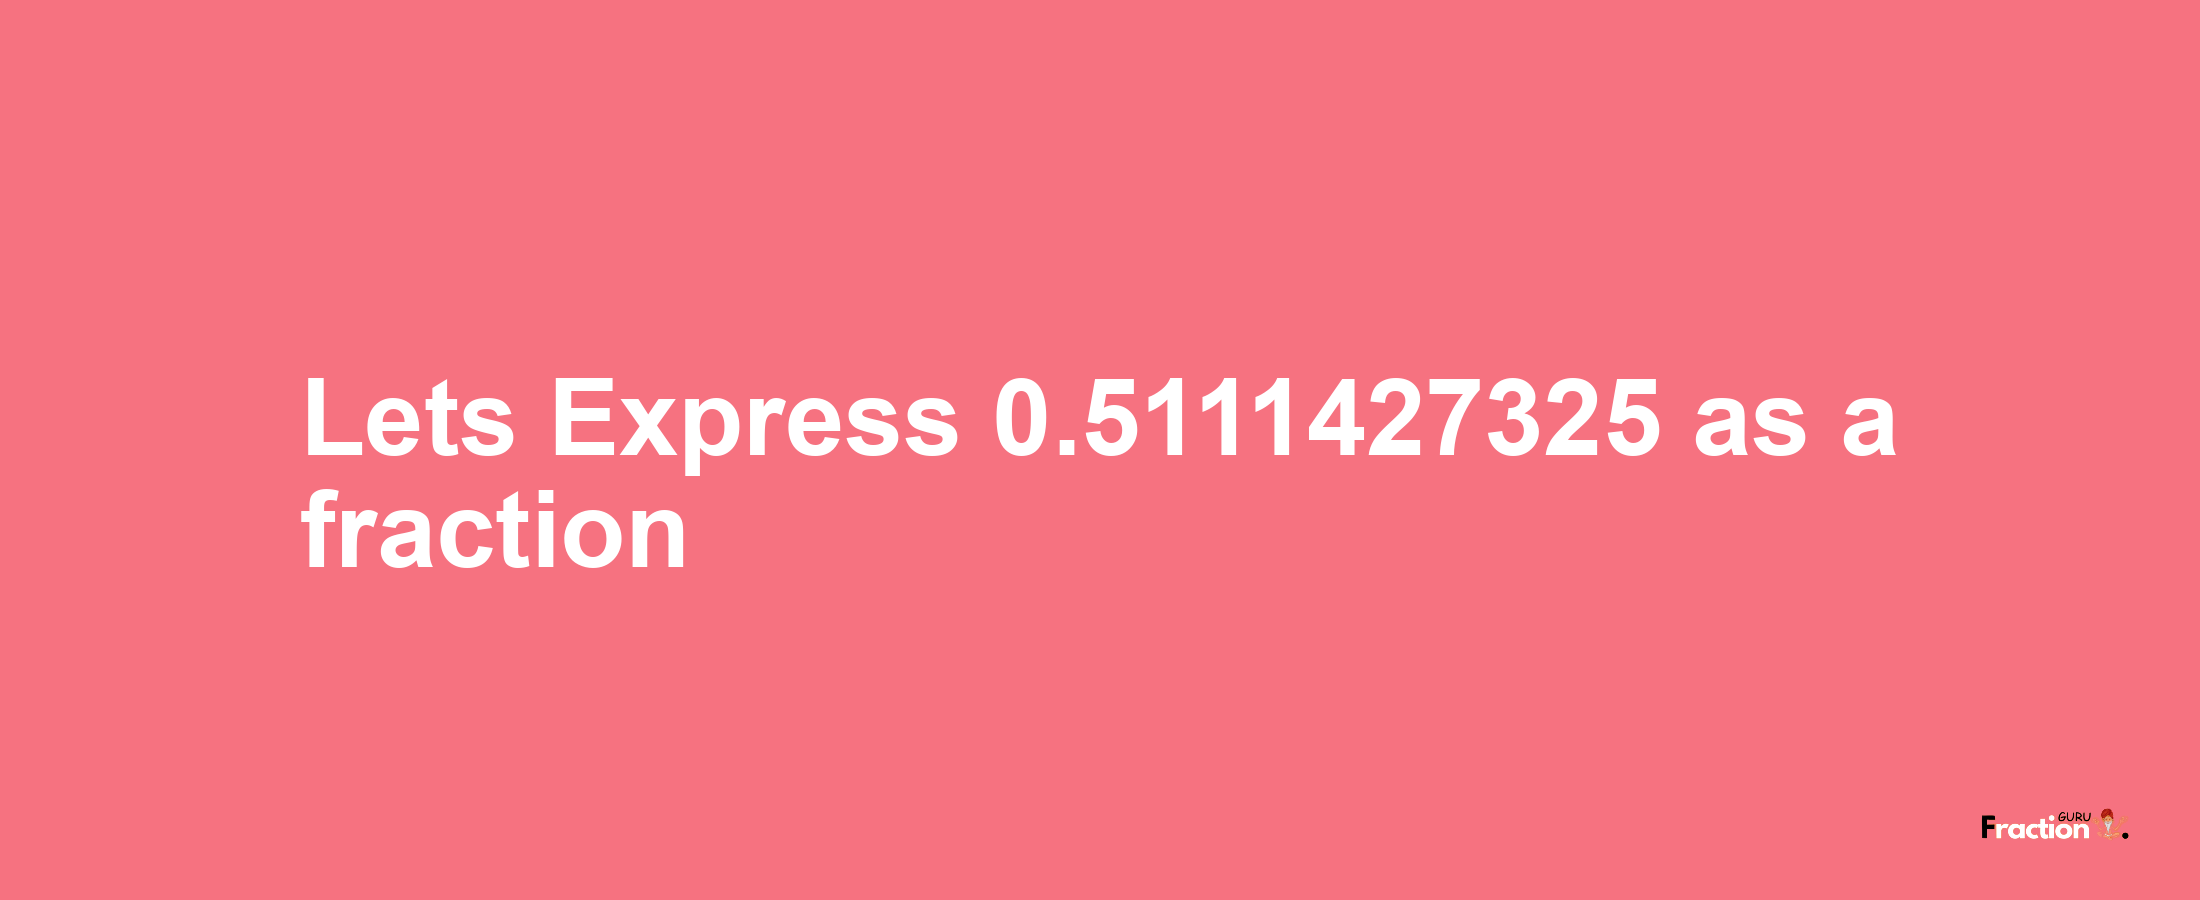 Lets Express 0.5111427325 as afraction